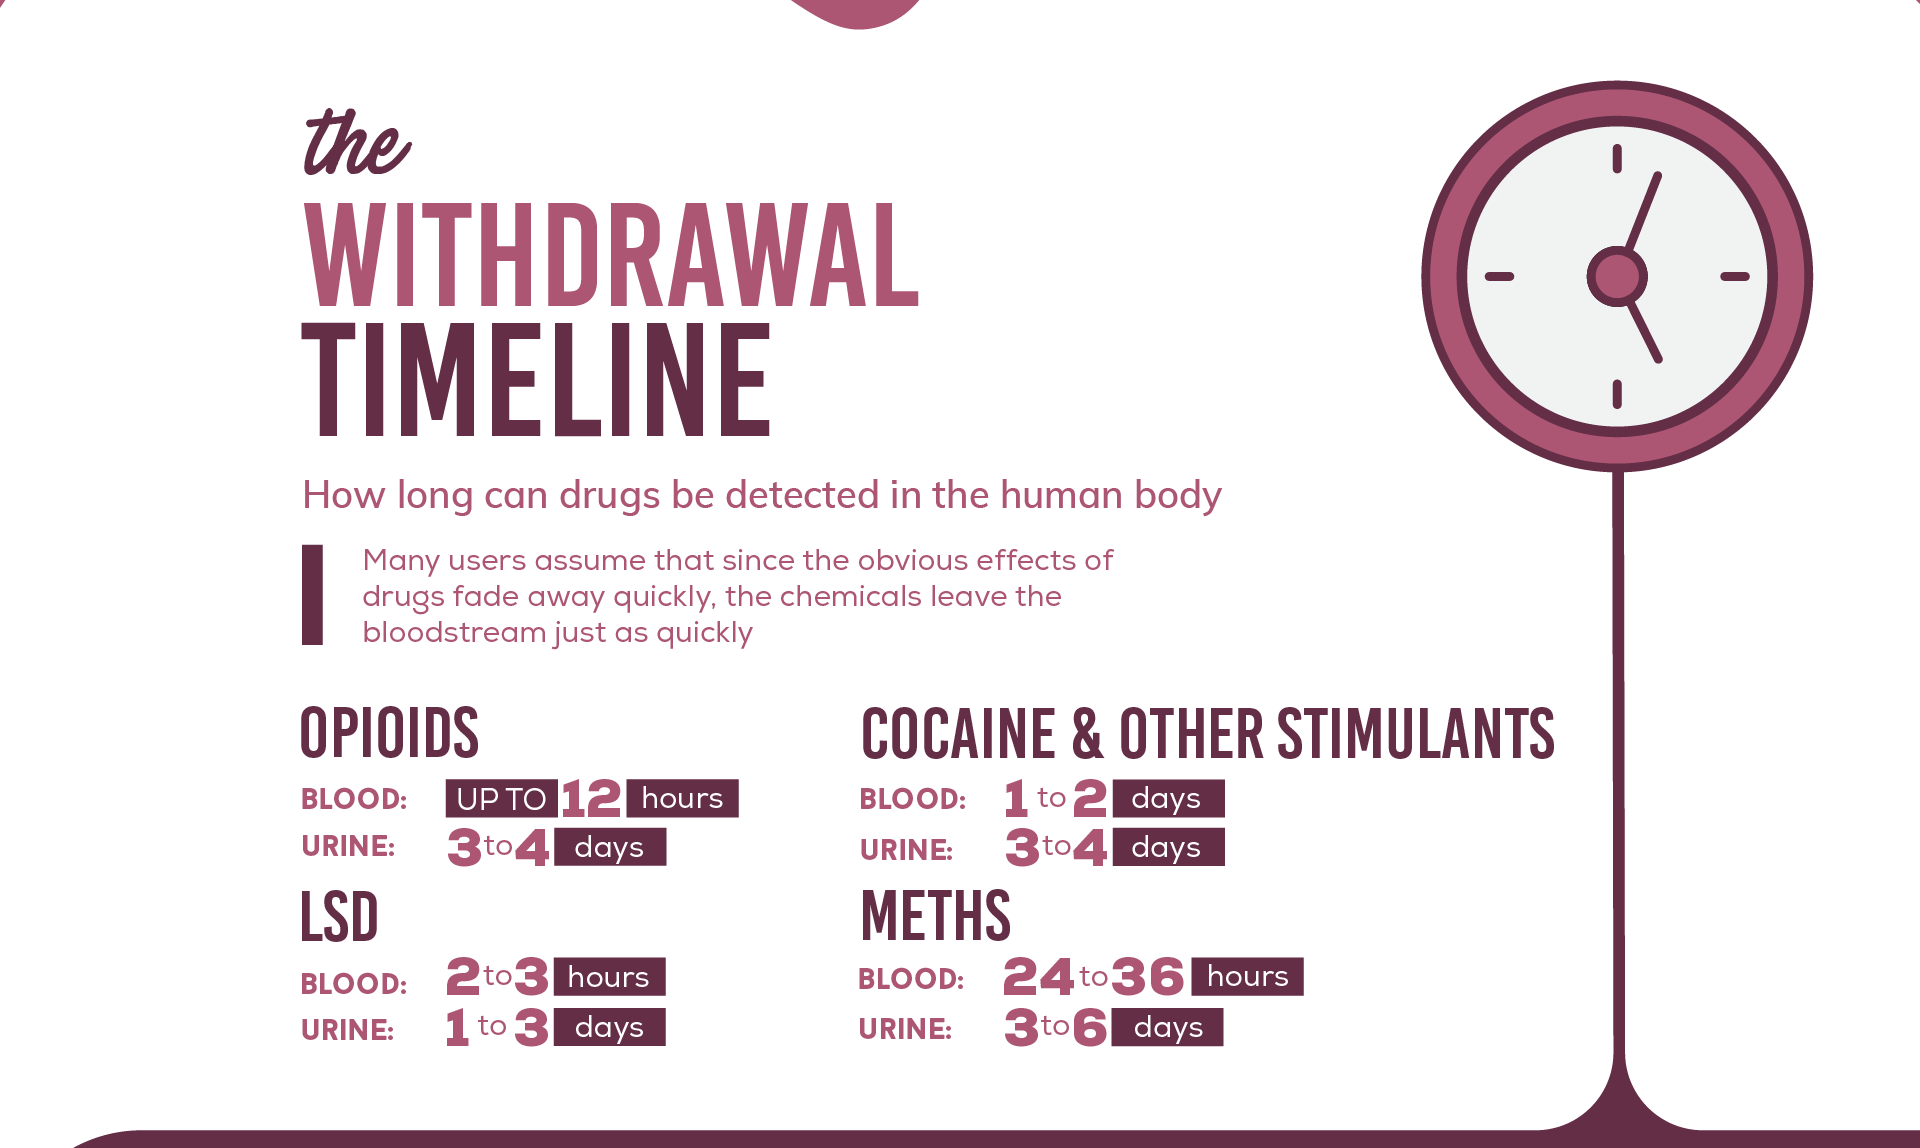 Many users assume that since the obvious effects of drugs fade away quickly, the chemicals leave the bloodstream just as quickly.Opiods can be detected in blood up to 12 hours after consume, and in urine can be detected from 3 to 4 days after consume it.Cocaine and other stimulants can be detected in blood from 1 to 2 days after consume and in urine from 3 to 4 days after consume it.LSD can be detected in blood from 2 to 3 hours fter consume and in urine from 1 to 3 days after consume it.METHS can be detected in blood from 24 to 36 hours after consume and in urine can be detected from 3 to 6 days after consume it.